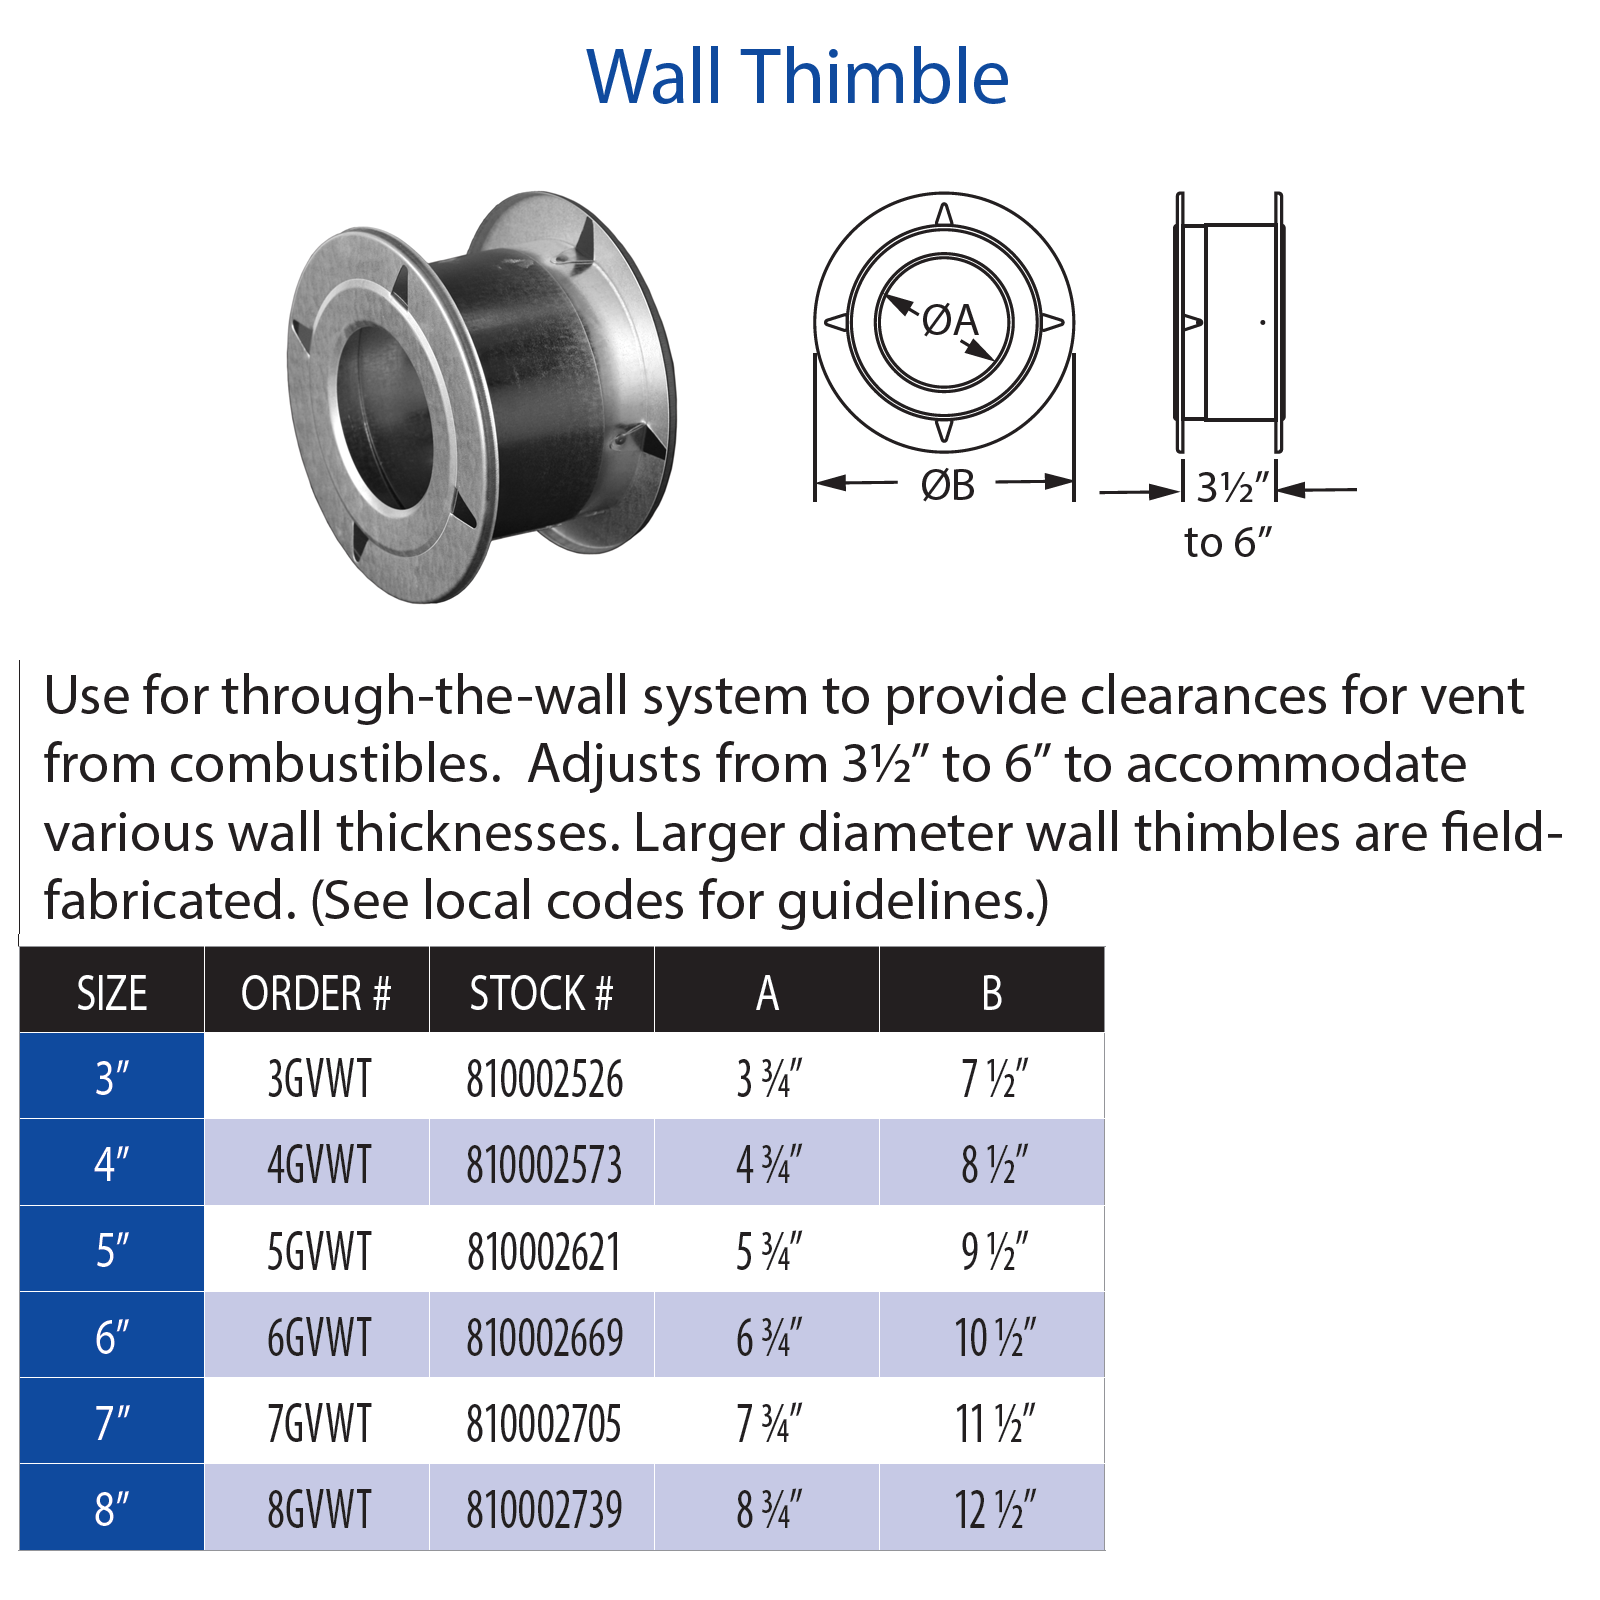 DuraVent 6DT-WT DuraTech Wall Thimble - 6